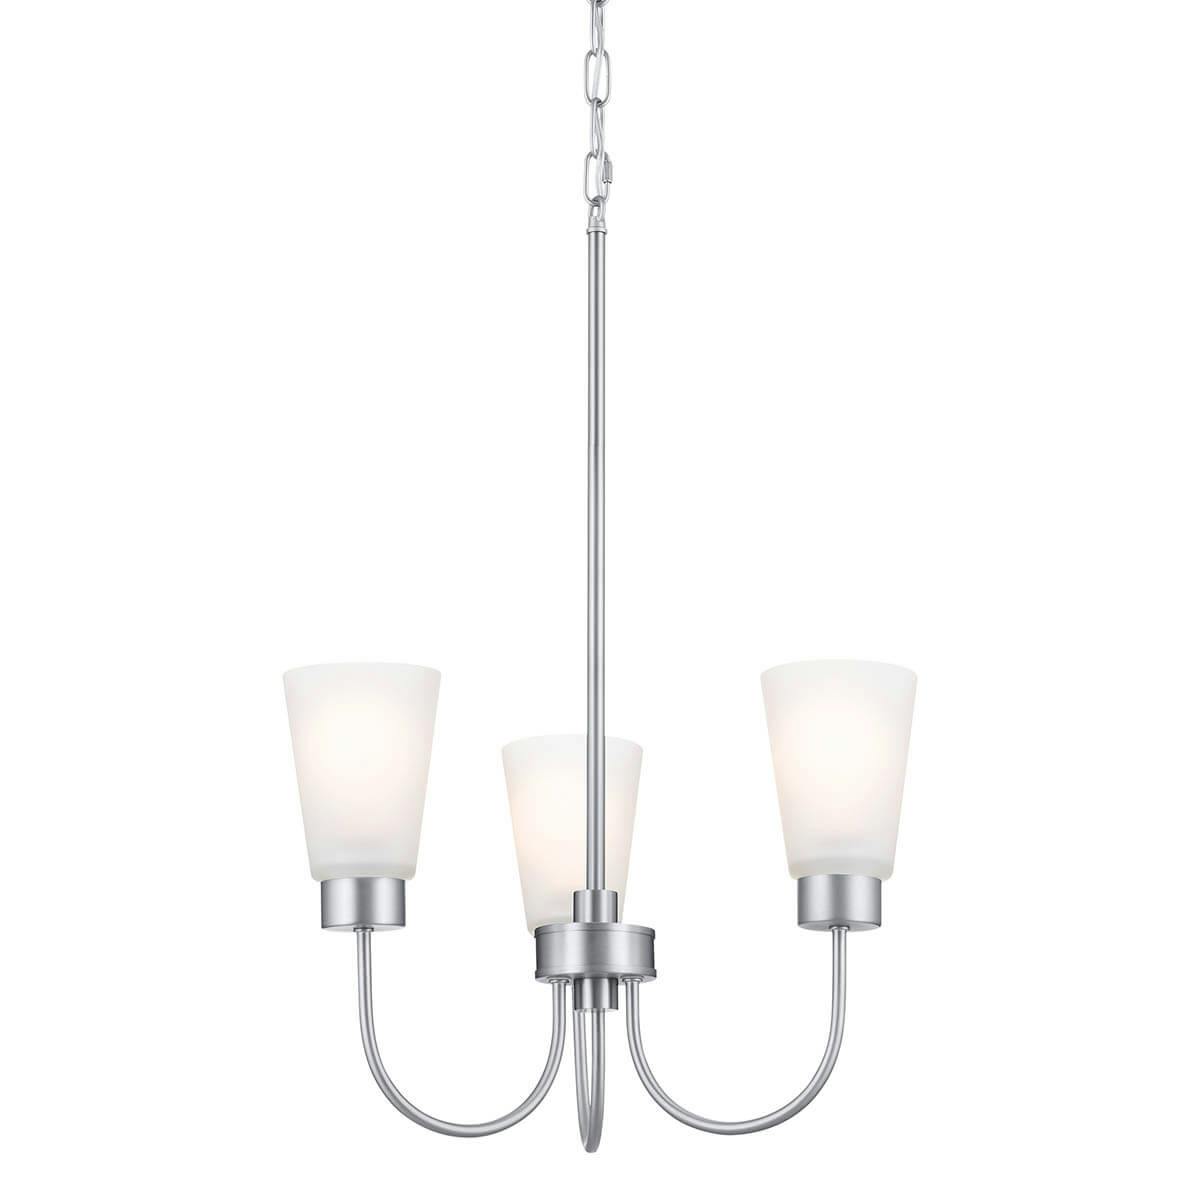 Erma 18"  Chandelier Brushed Nickel  without the canopy on a white background